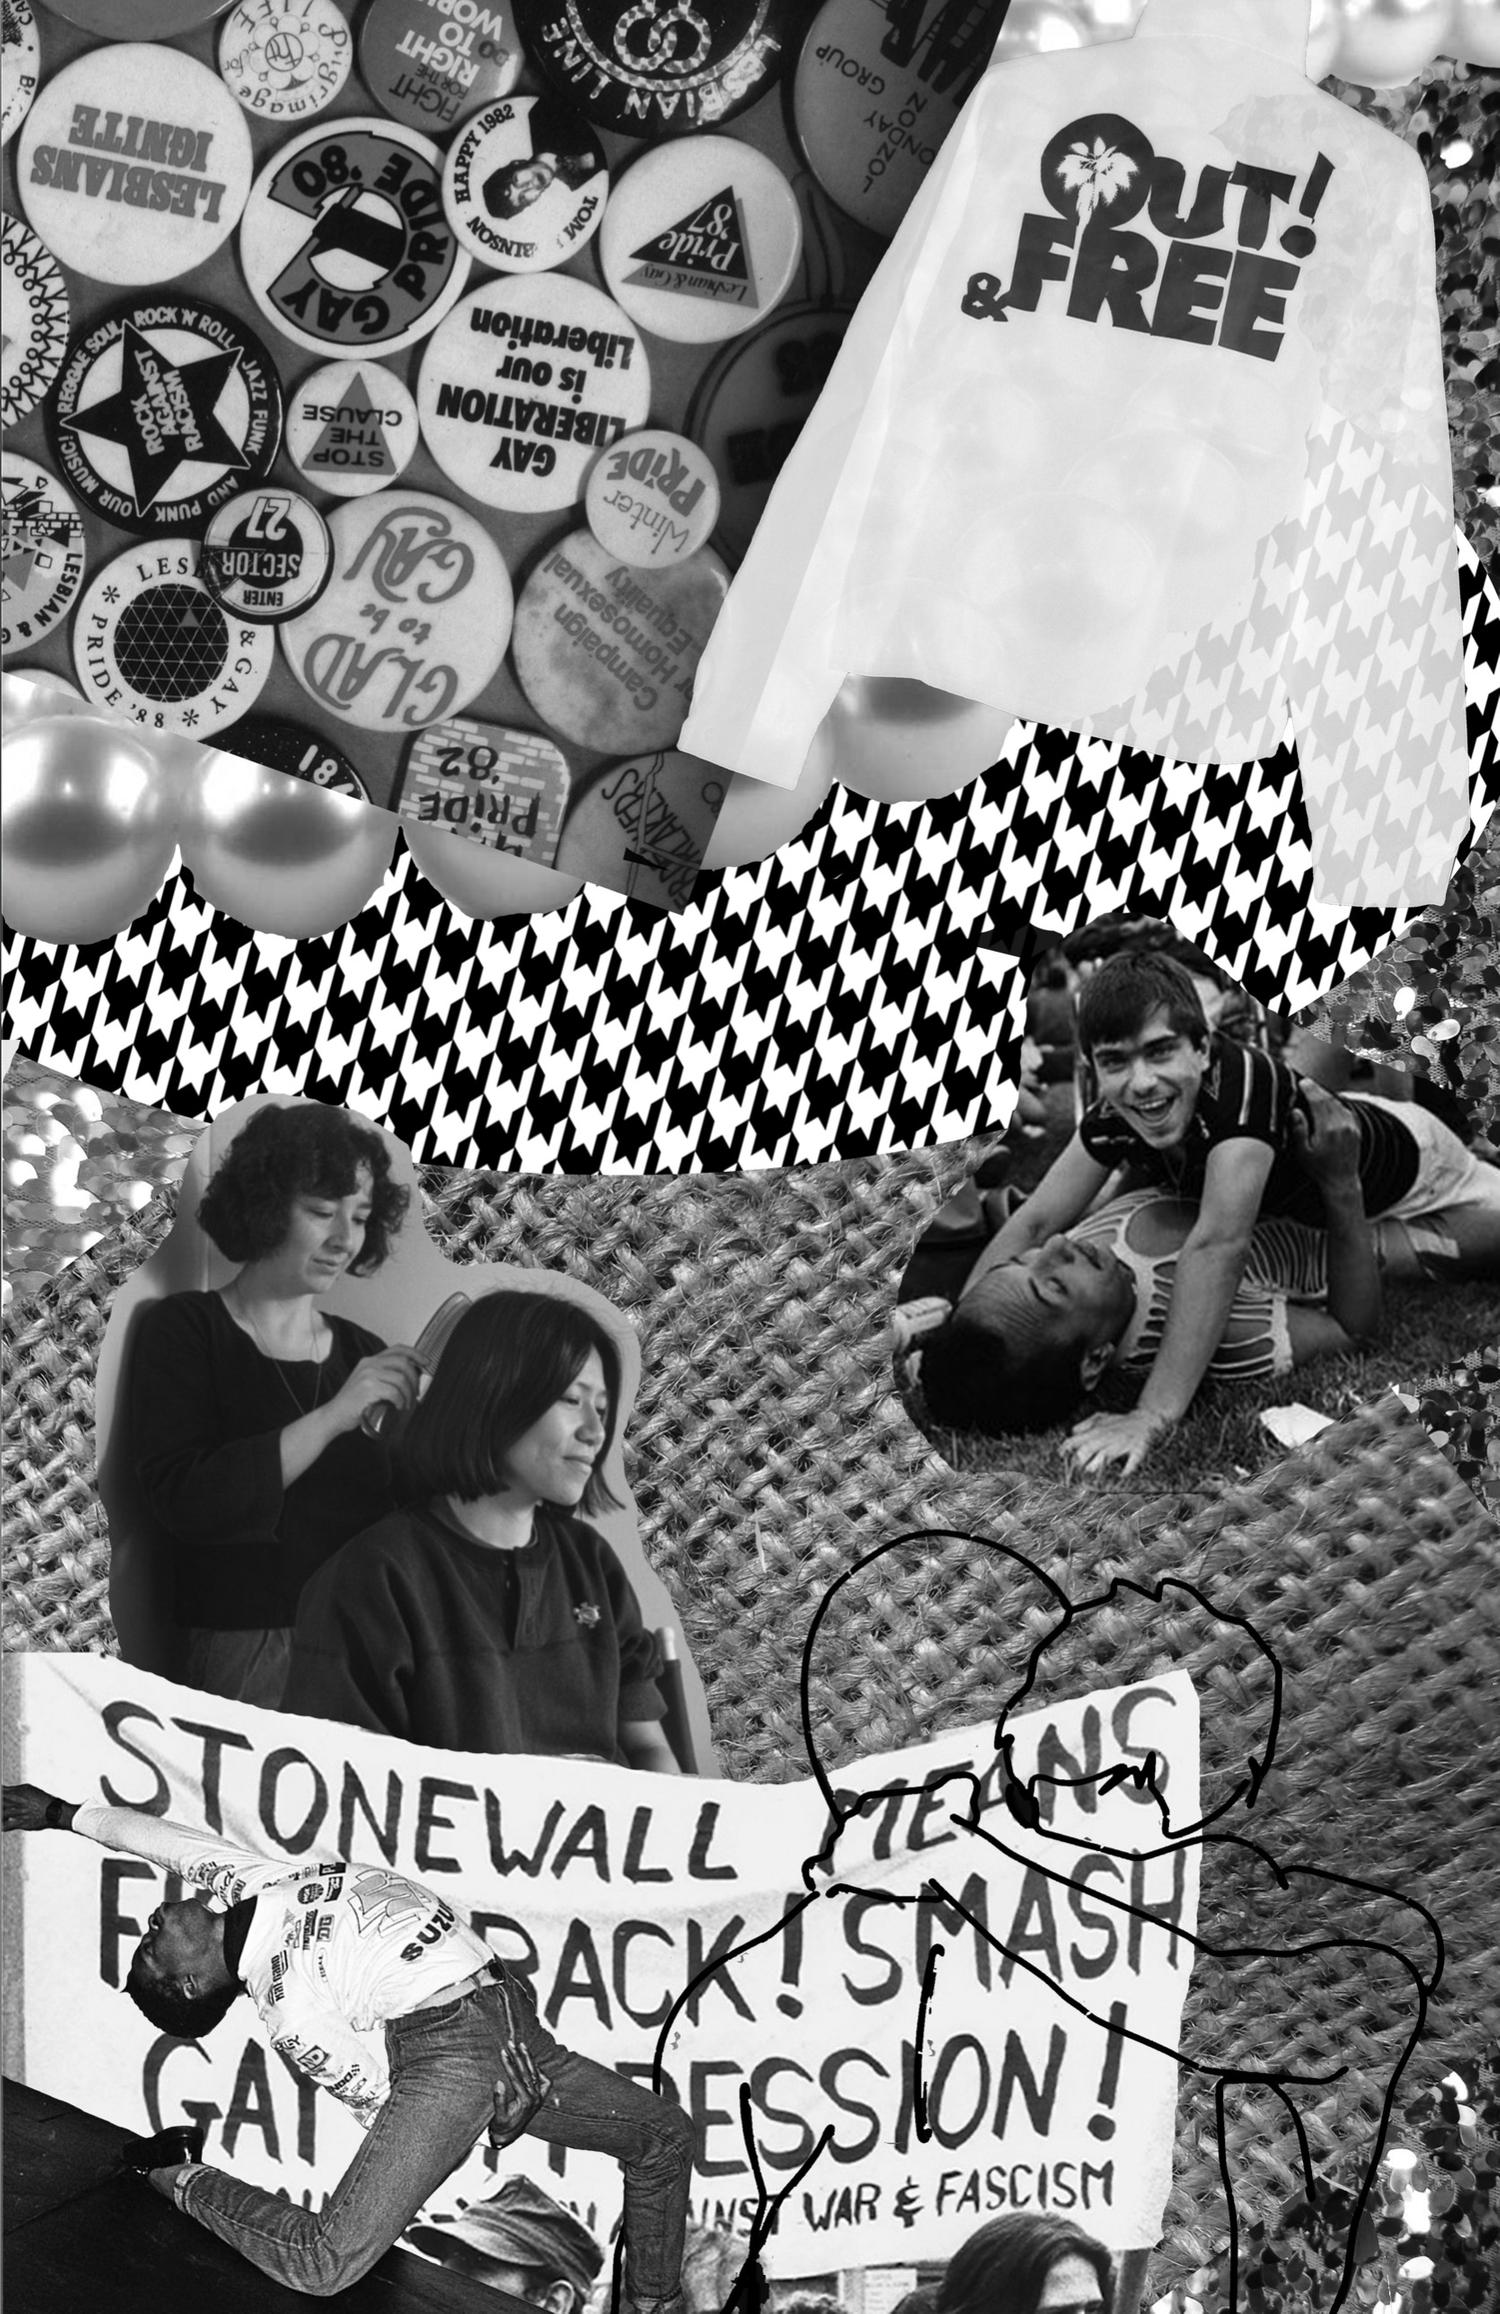 Monochromatic collage of lesbian buttons, a sweatshirt that says "out and free," a women brushing another woman's hair, and two people wrestling in a park. In the foreground someone does a backbend in front of a protest banner that reads "Stonewall means fight back! Smash gay oppression!"